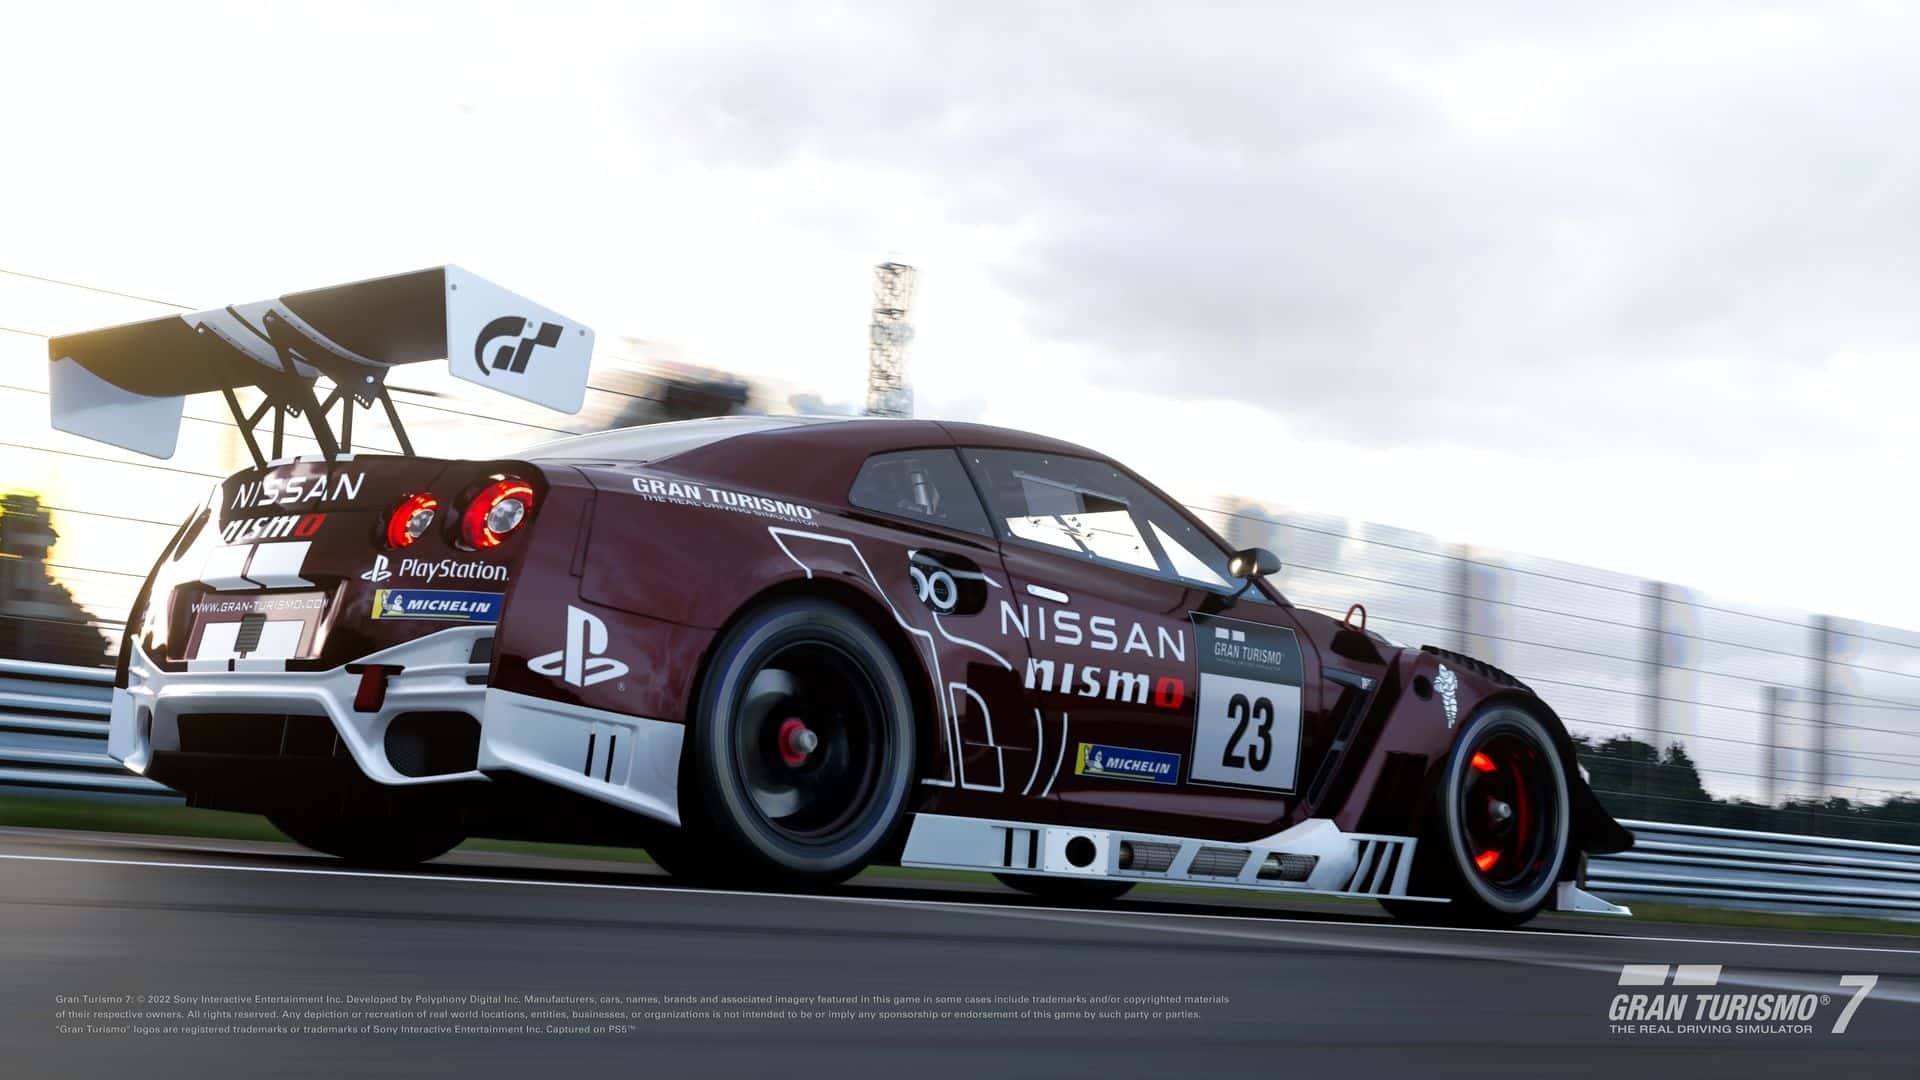 First Big Gran Turismo 7 Update Brings New Cars And More